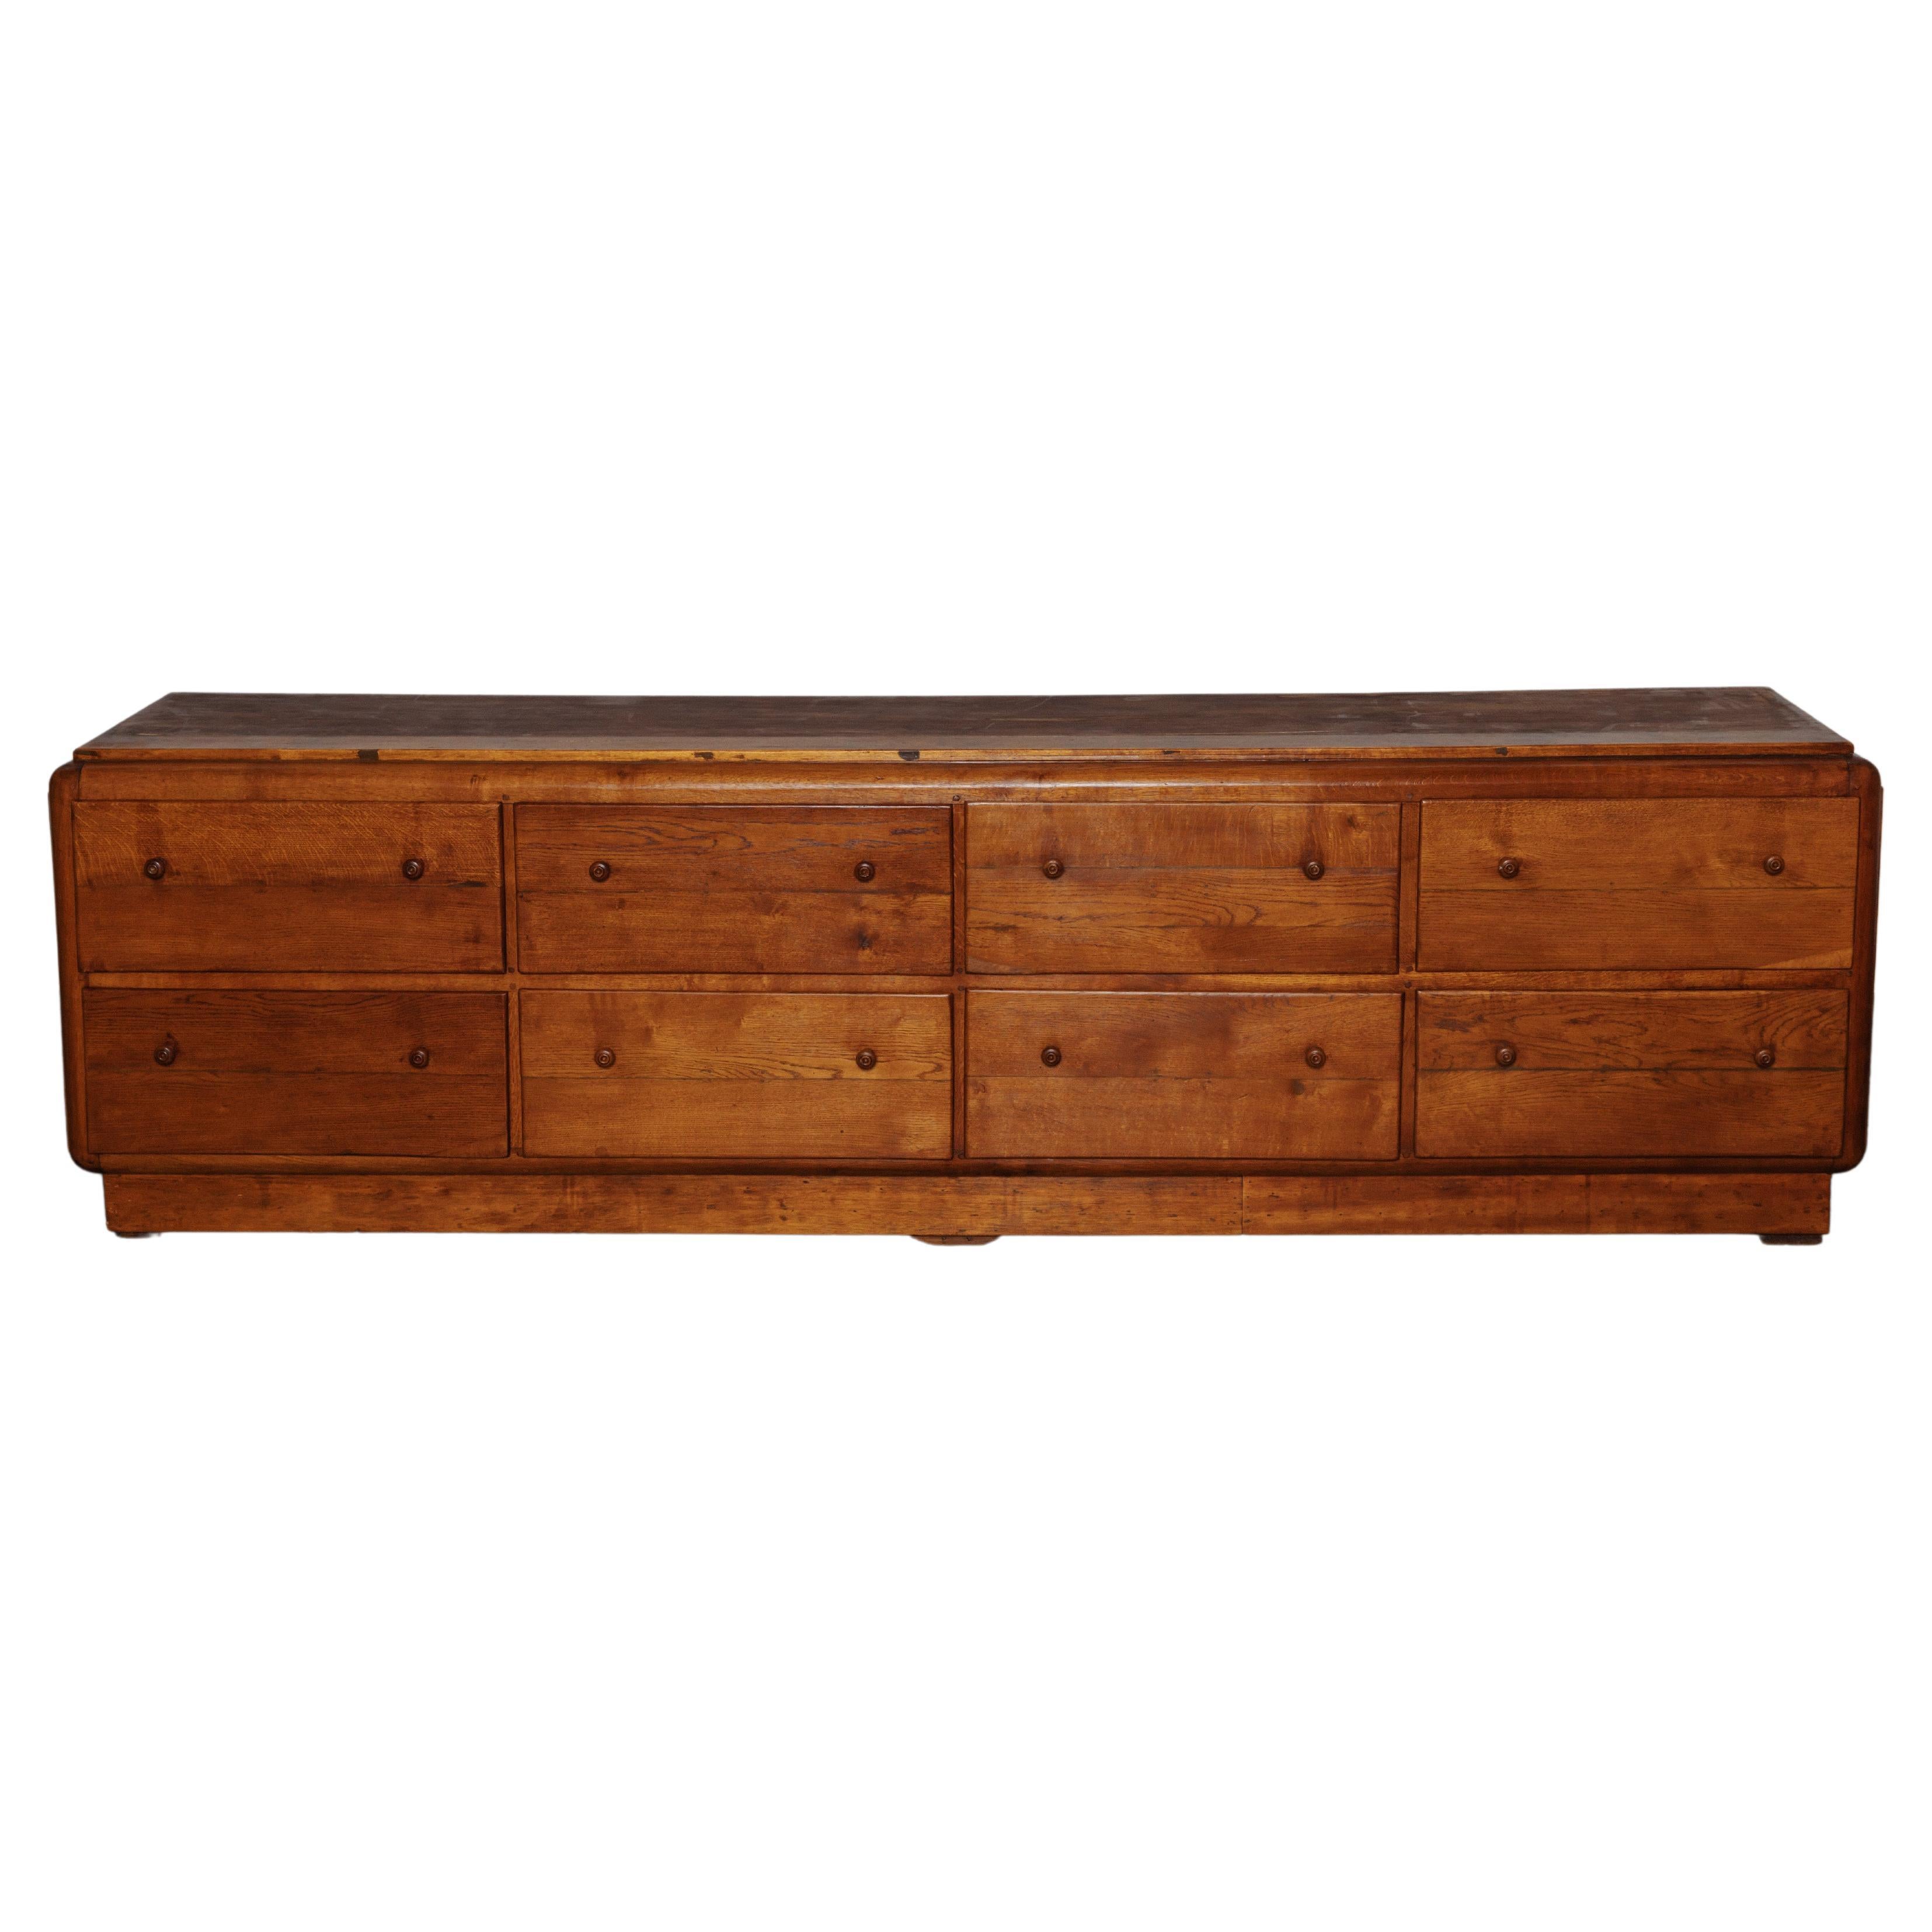 XL Pine Haberdashery Cabinet From France, Circa 1940 For Sale